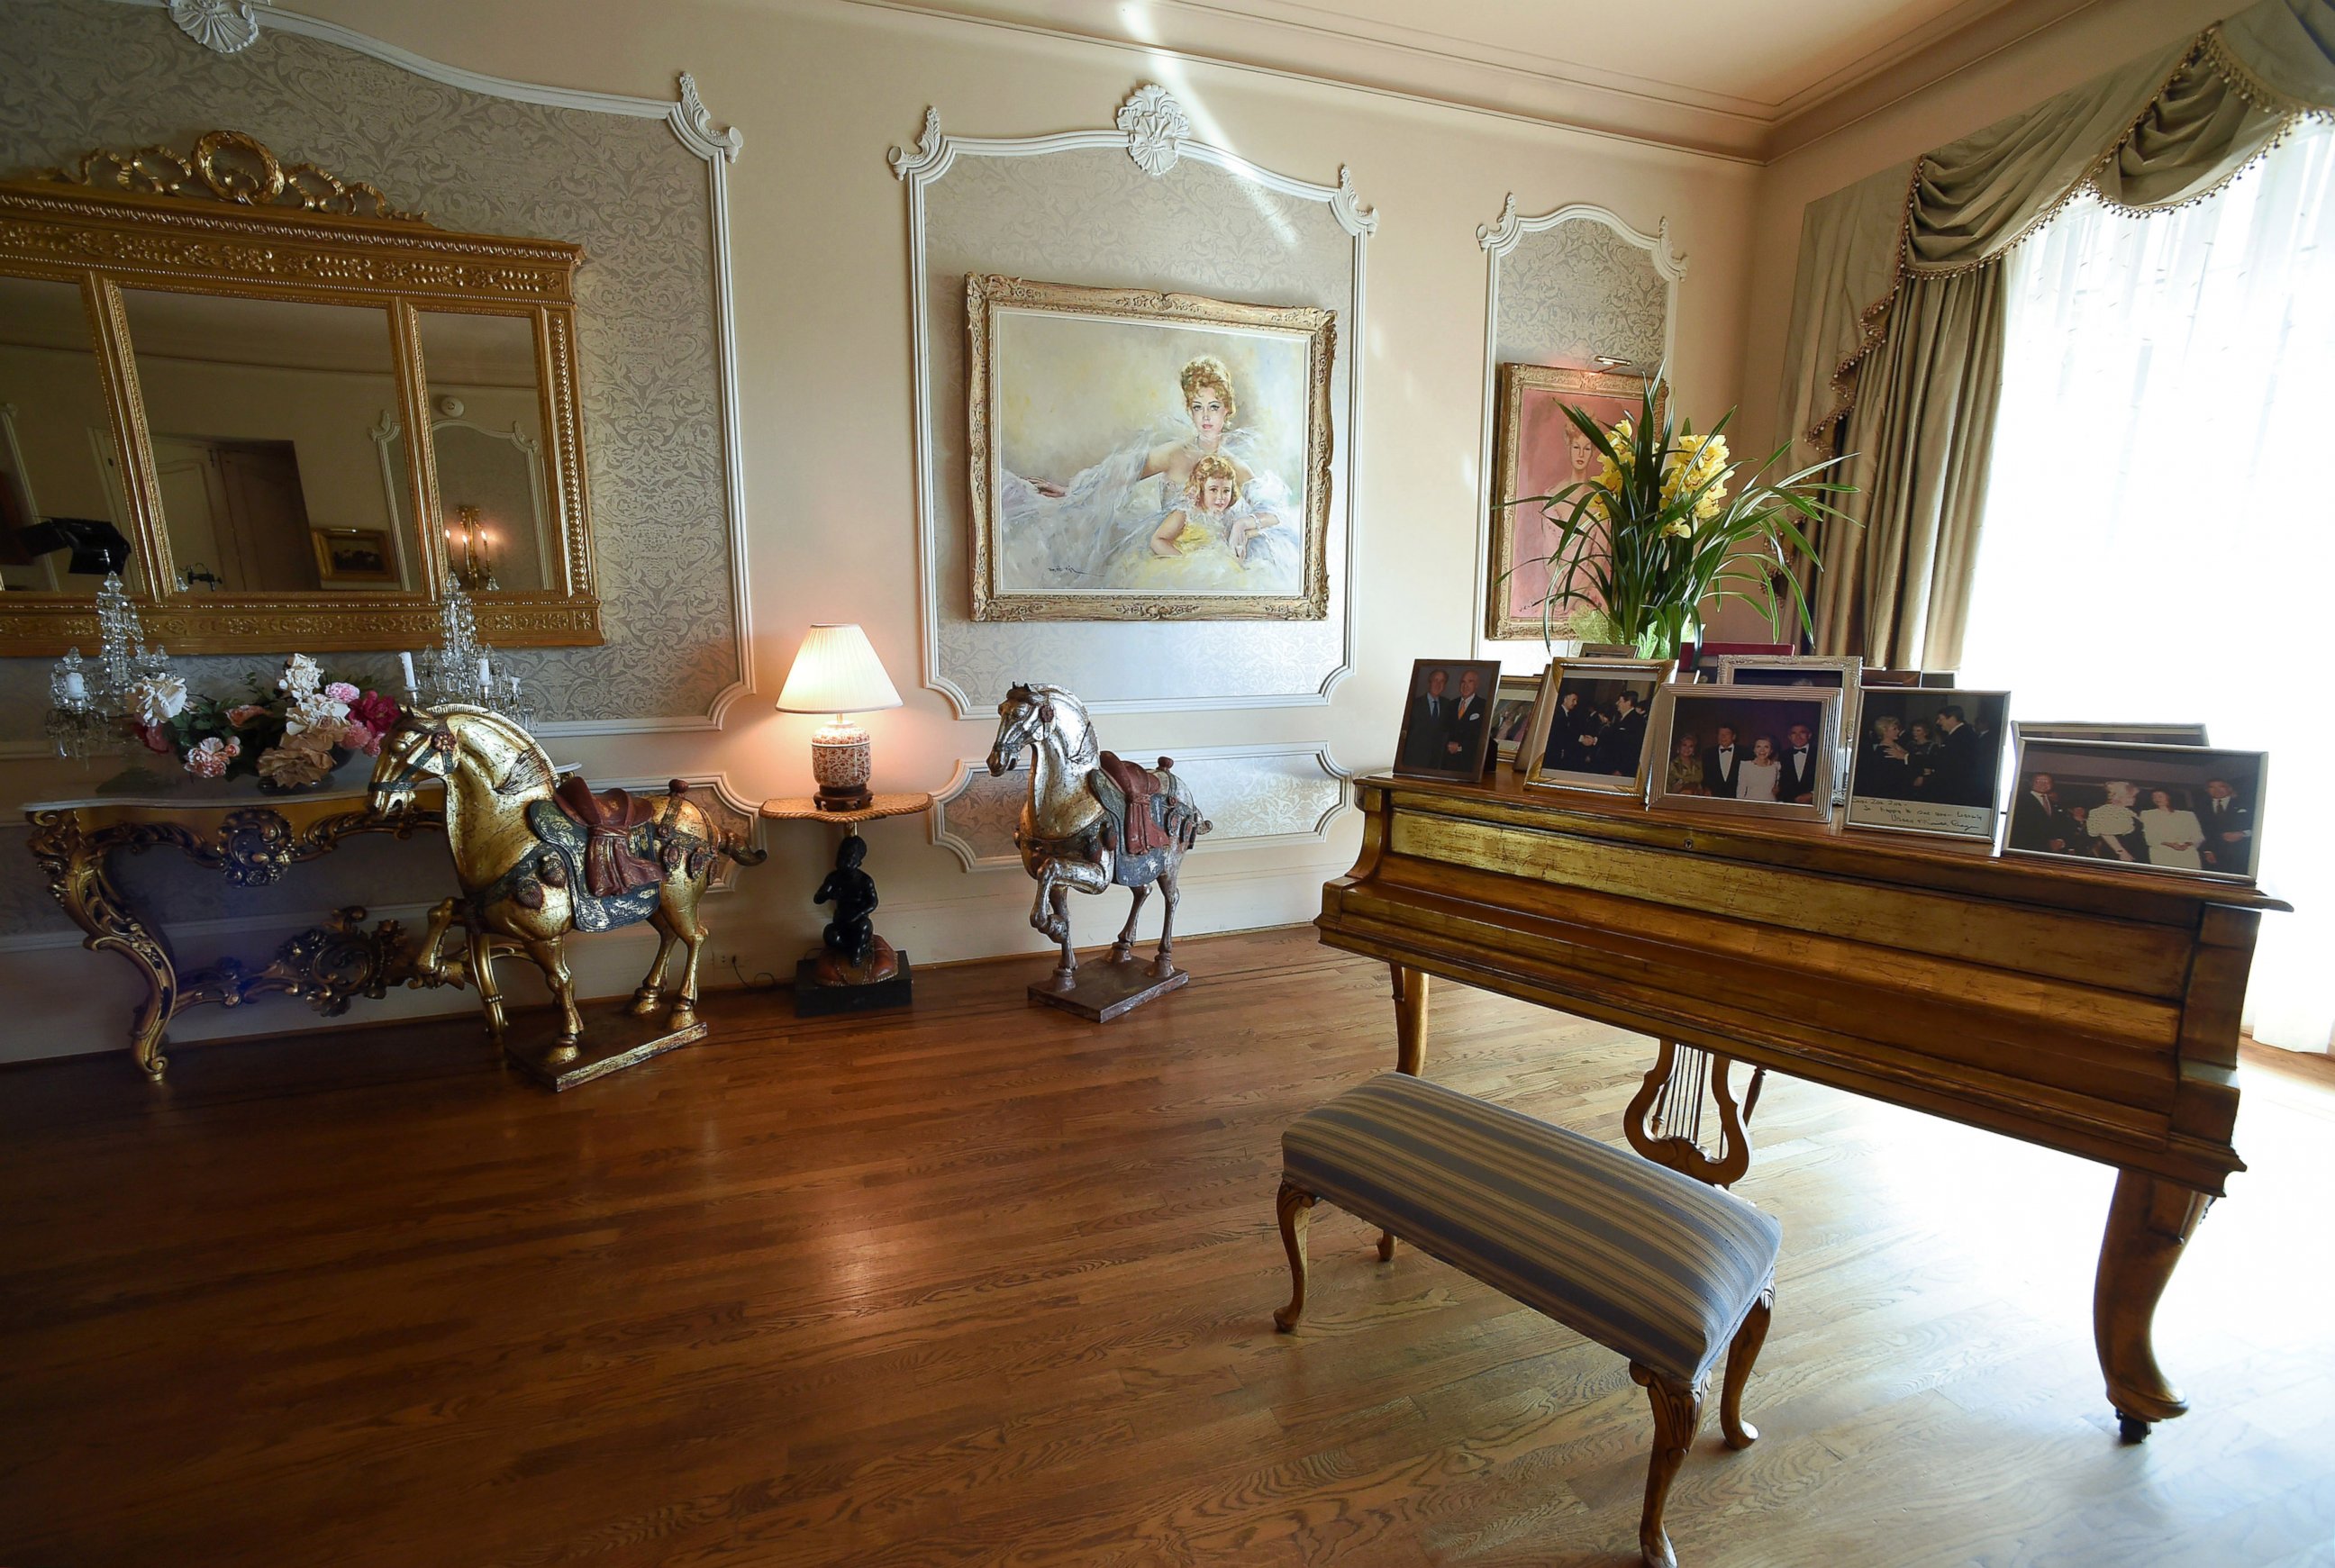 PHOTO: Zsa Zsa Gabor's Bel Air mansion is on sale. It was priced at $12.9 million in 2011.